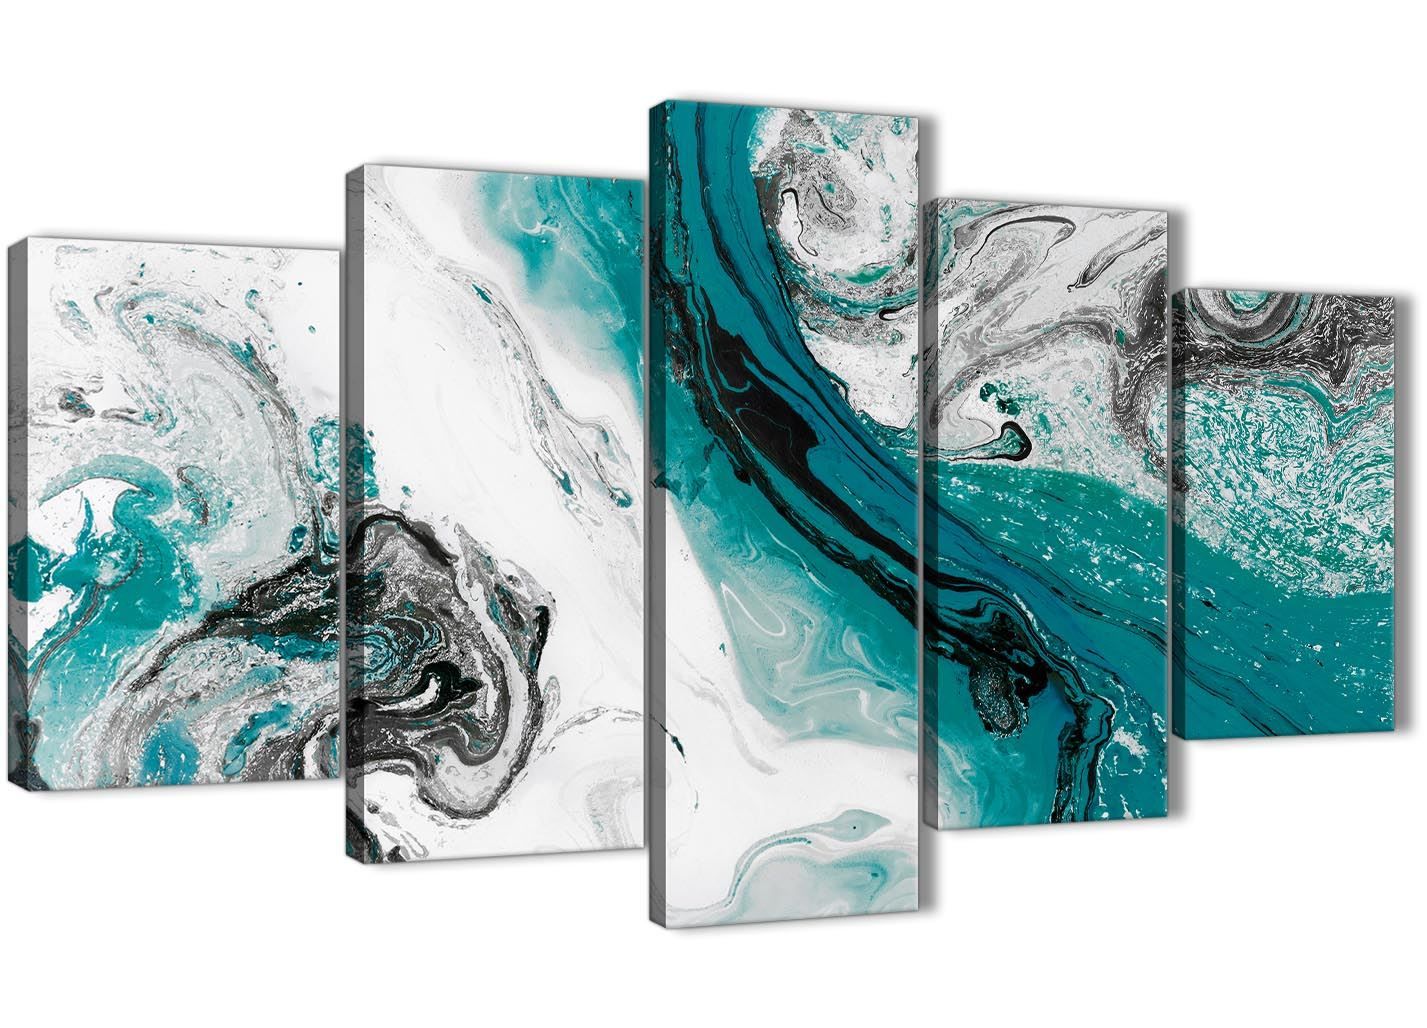 Teal And Grey Swirl Living Room Canvas Wall Art Throughout Most Recent Swirl Wall Art (View 8 of 20)